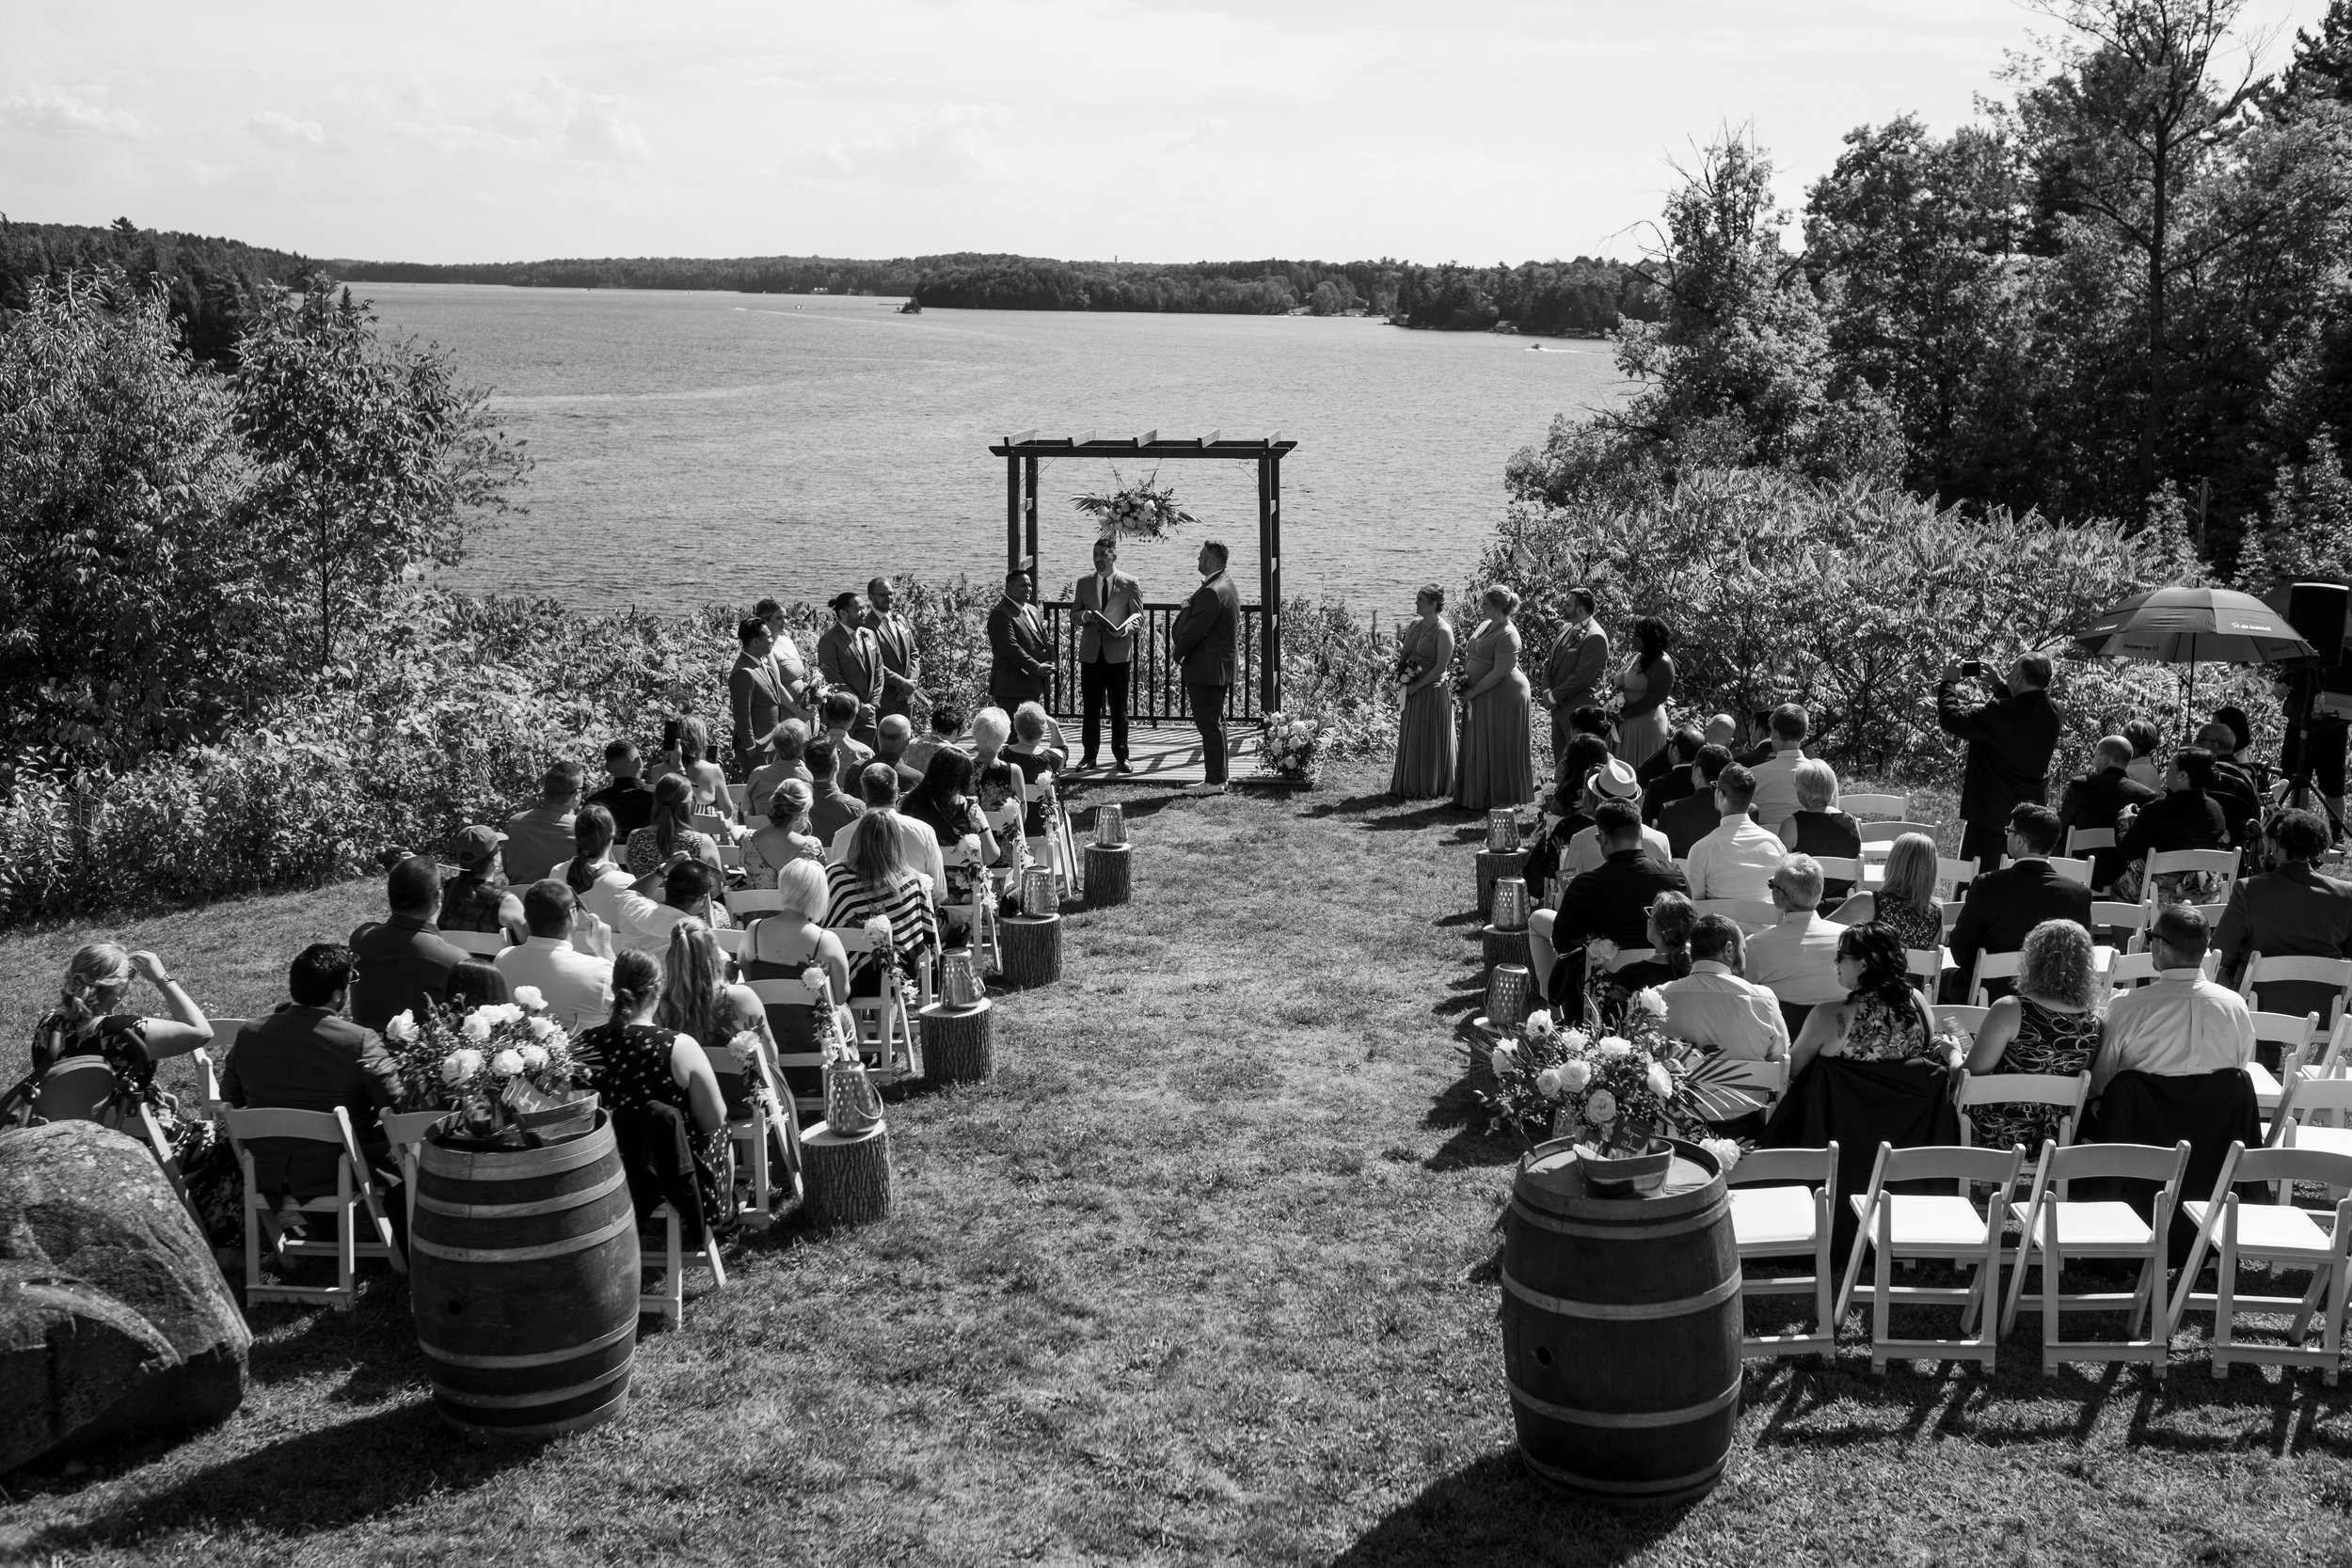  A black and white candid wedding photograph of Bryan + Adam  aisle during their  outdoor wedding ceremony overlooking the lake at the JW Marriot The Rosseau in Muskoka by Toronto wedding photographer Scott Williams  